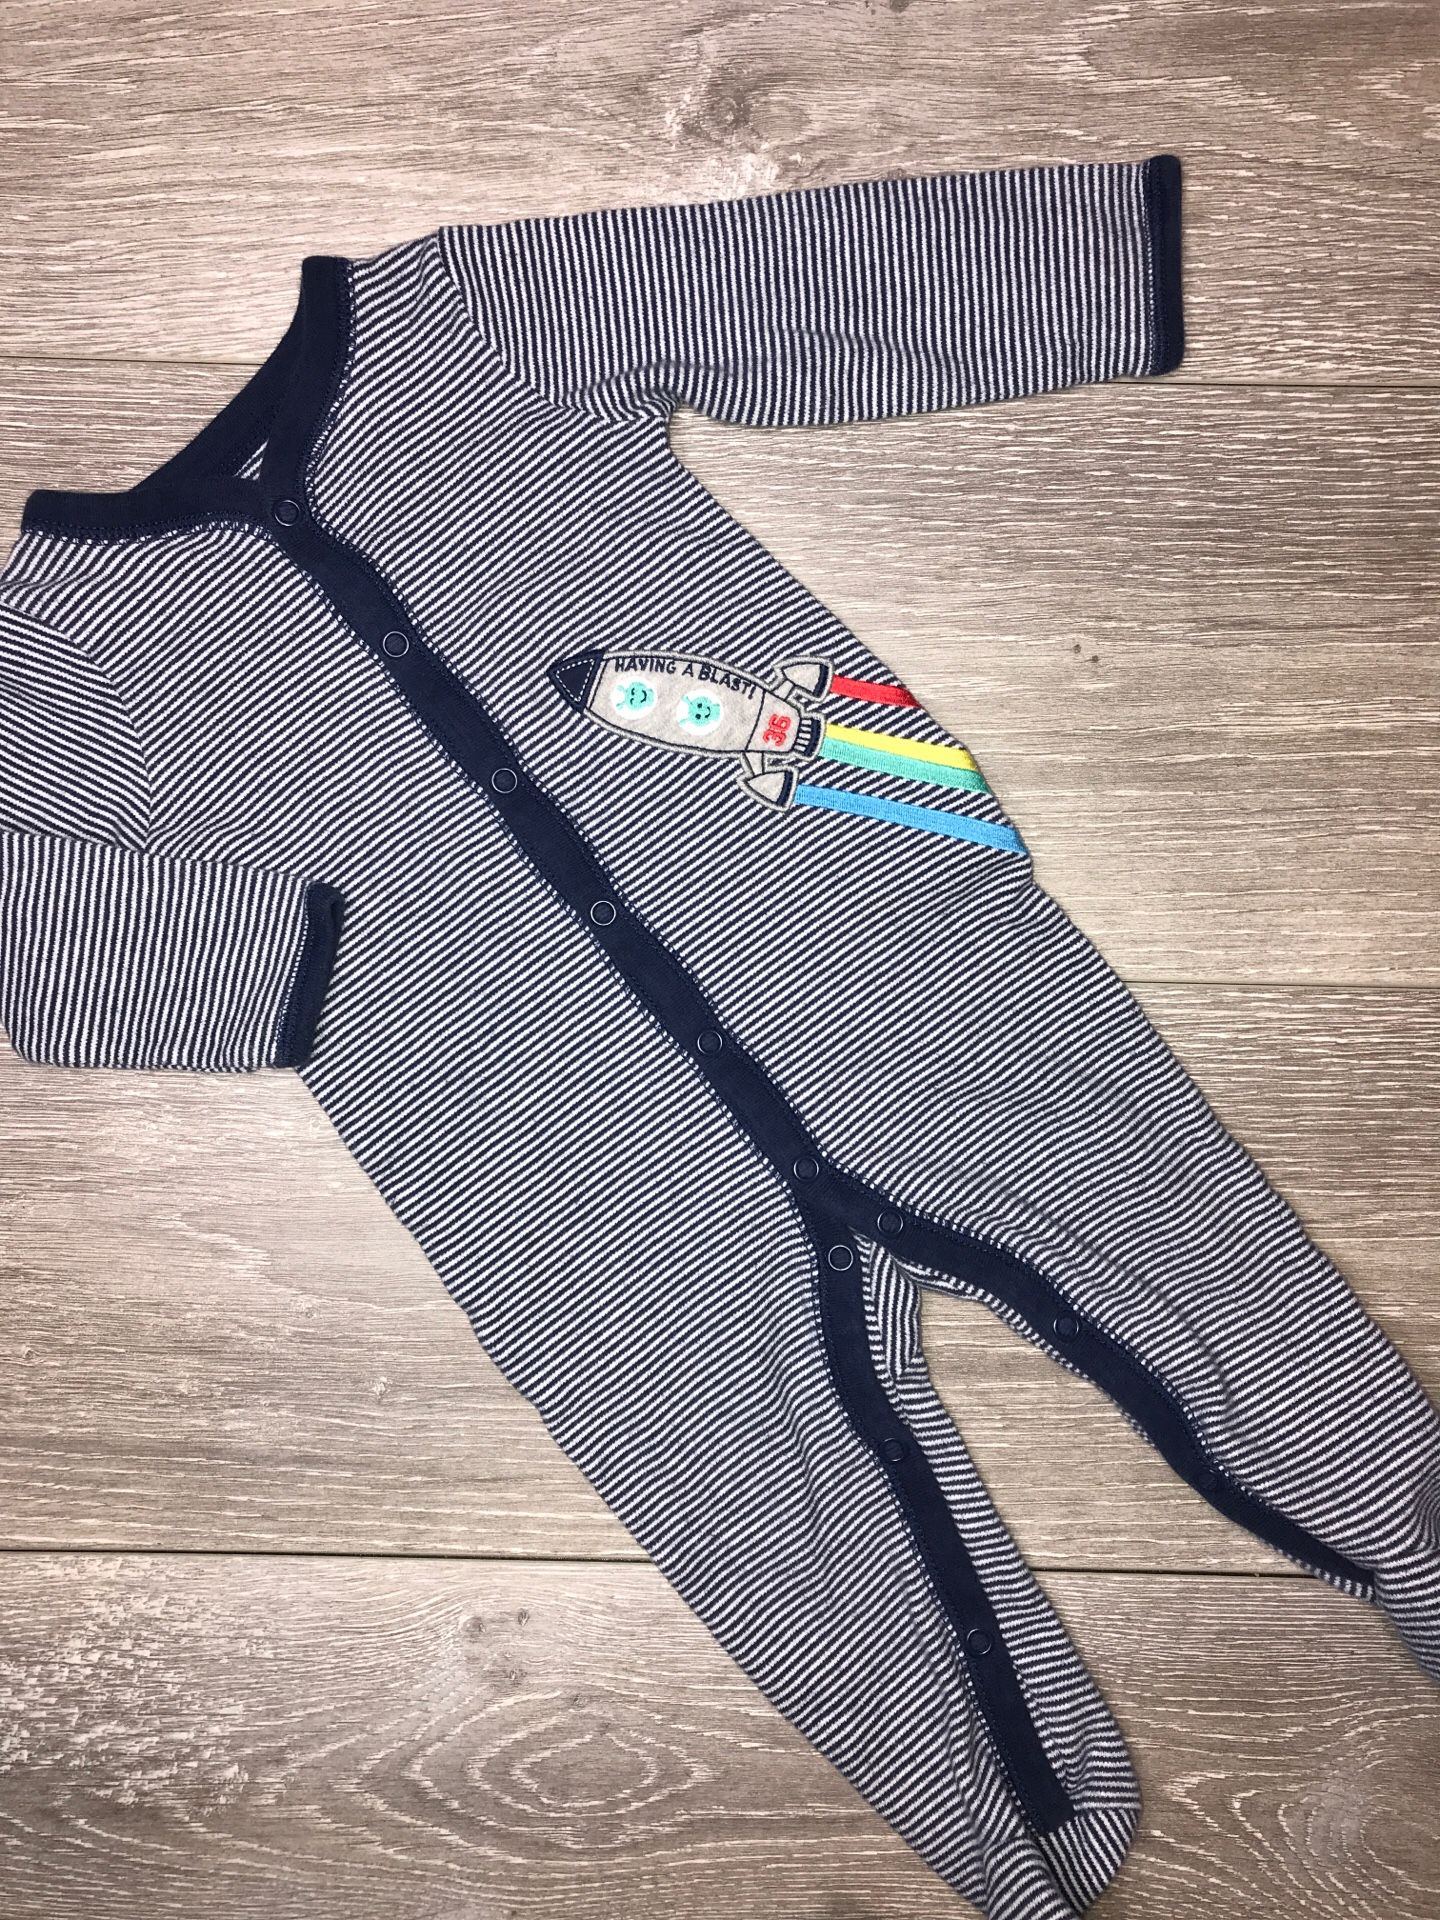 Baby Boy Clothing Carter’s 9 Months $2.50 (Pending Pickup)